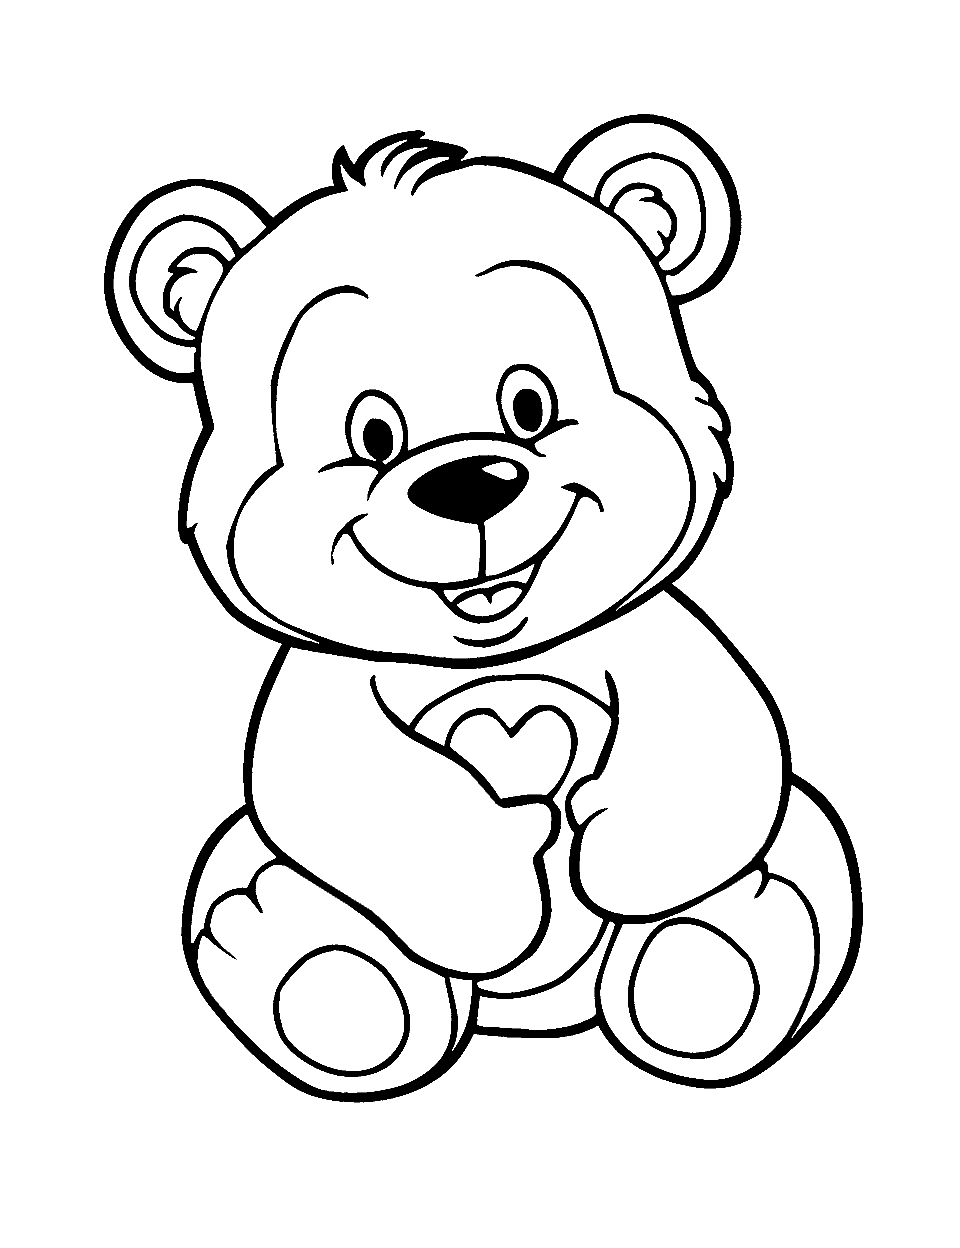 Simple Teddy Bear Outline Coloring Page - A basic outline of a teddy bear for easy coloring.